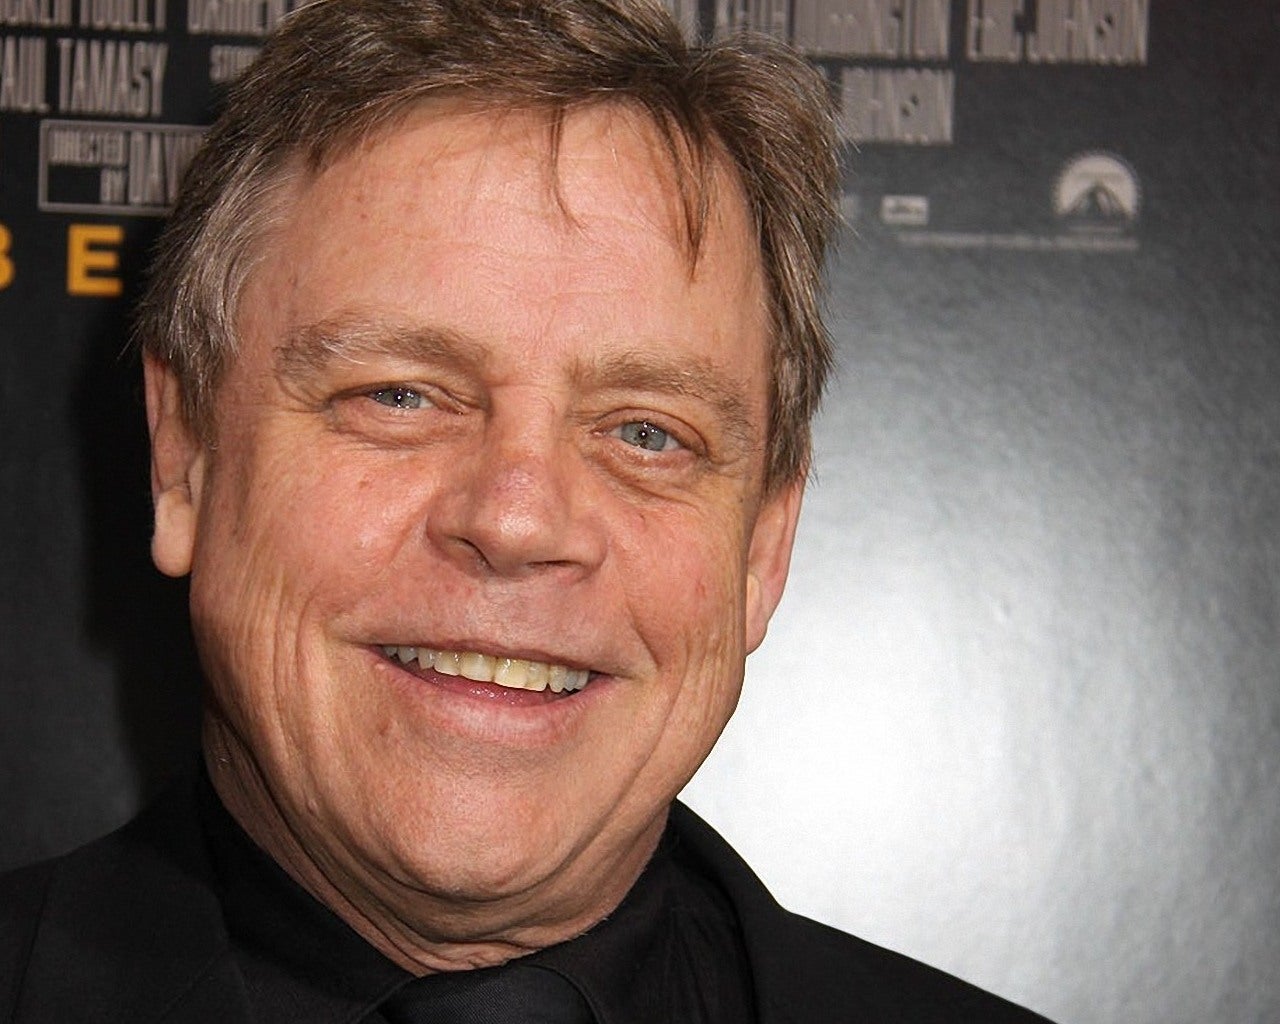 Image for Mark Hamill has reportedly been offered the role of Vesemir in The Witcher Netflix series